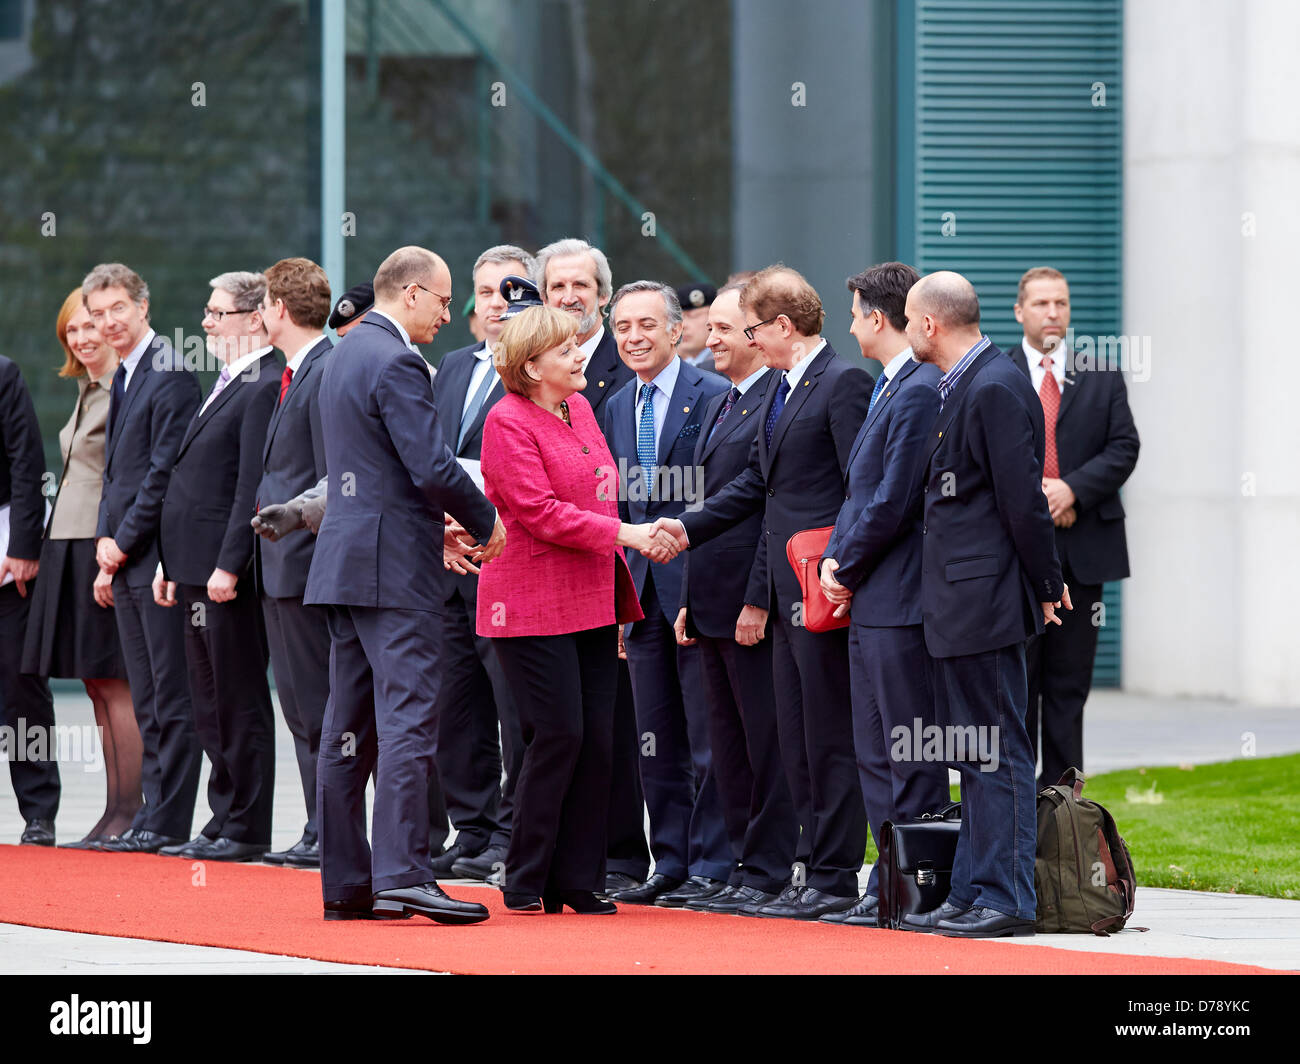 Berlin, Germany. 30th April 2013. Greeting of the Prime Minister of the Italian Republic, Enrico Letta, with military honors by German Chancellor Angela Merkel in the main courtyard of the Federal Chancellery in Berlin. On Picture:  Angela Merkel (CDU), German Chancellor, and Enrico Letta, new Prime Minister of Italia, greats the Federal Ministers fron bouth Country. Credit:  Reynaldo Chaib Paganelli / Alamy Live News Stock Photo